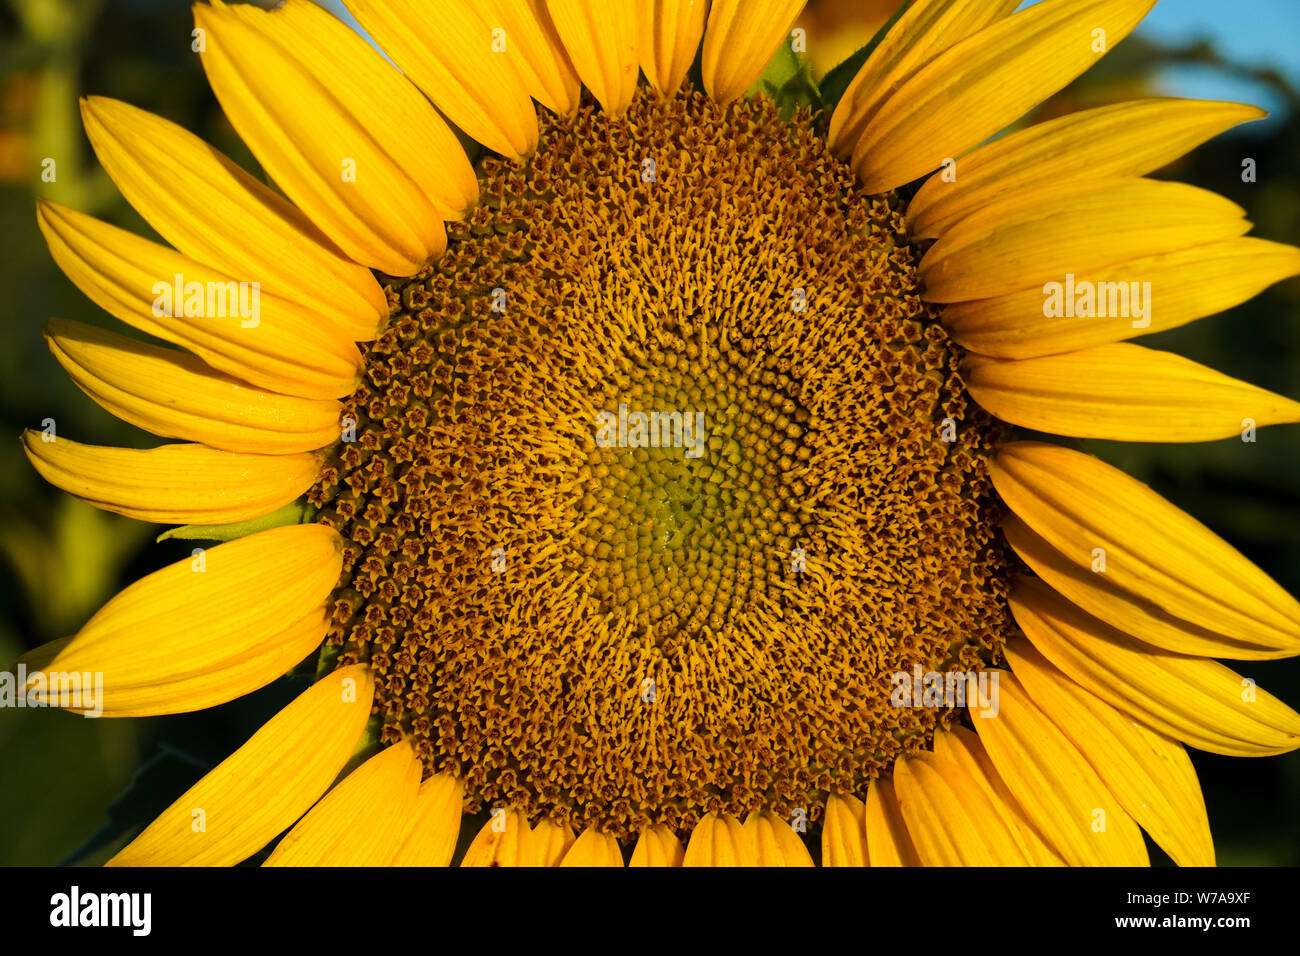 Close-up image of a sunflower Stock Photo